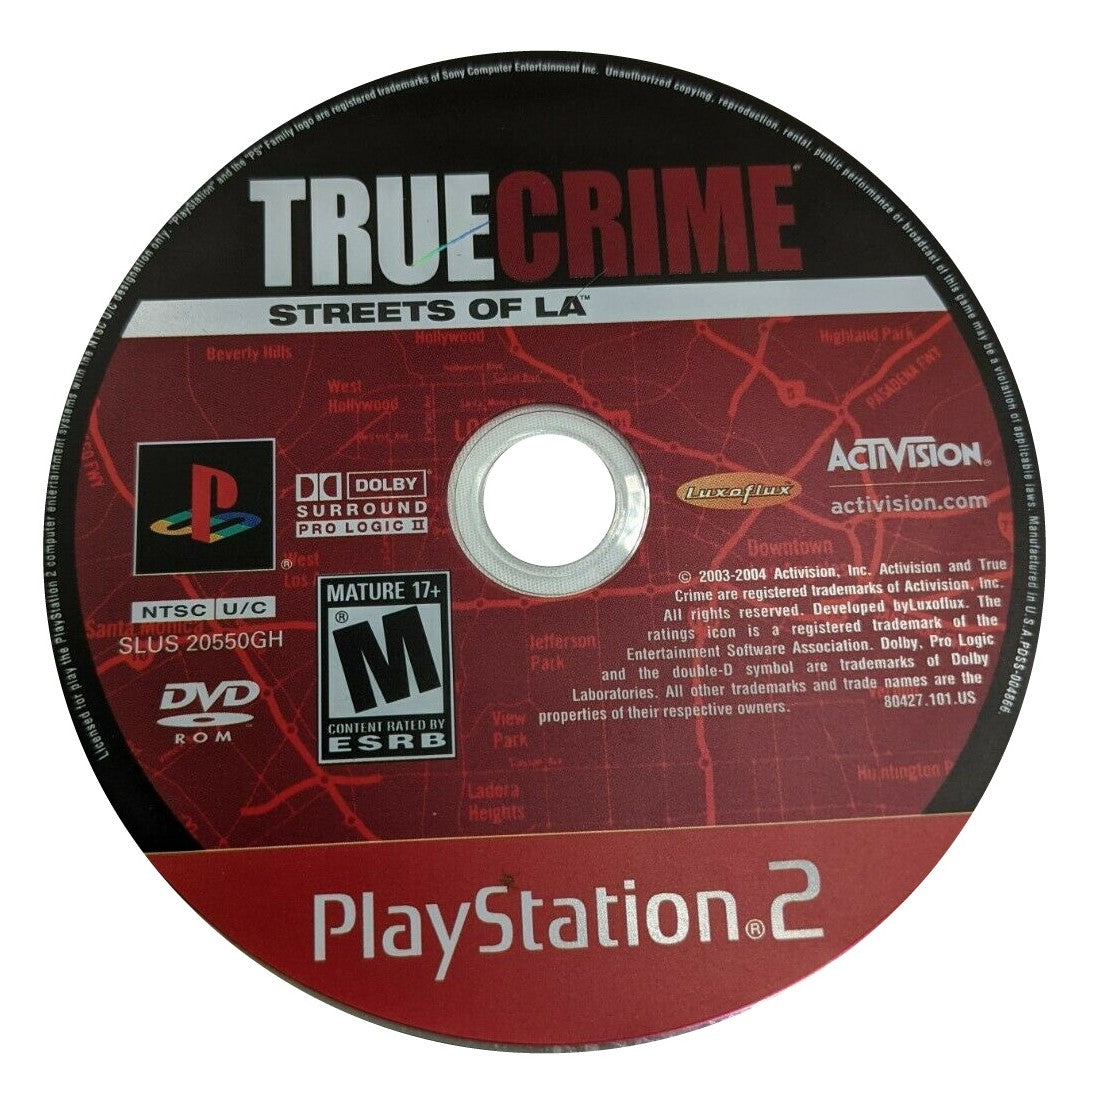 True Crime: Streets of LA (Greatest Hits) - PlayStation 2 (PS2) Game